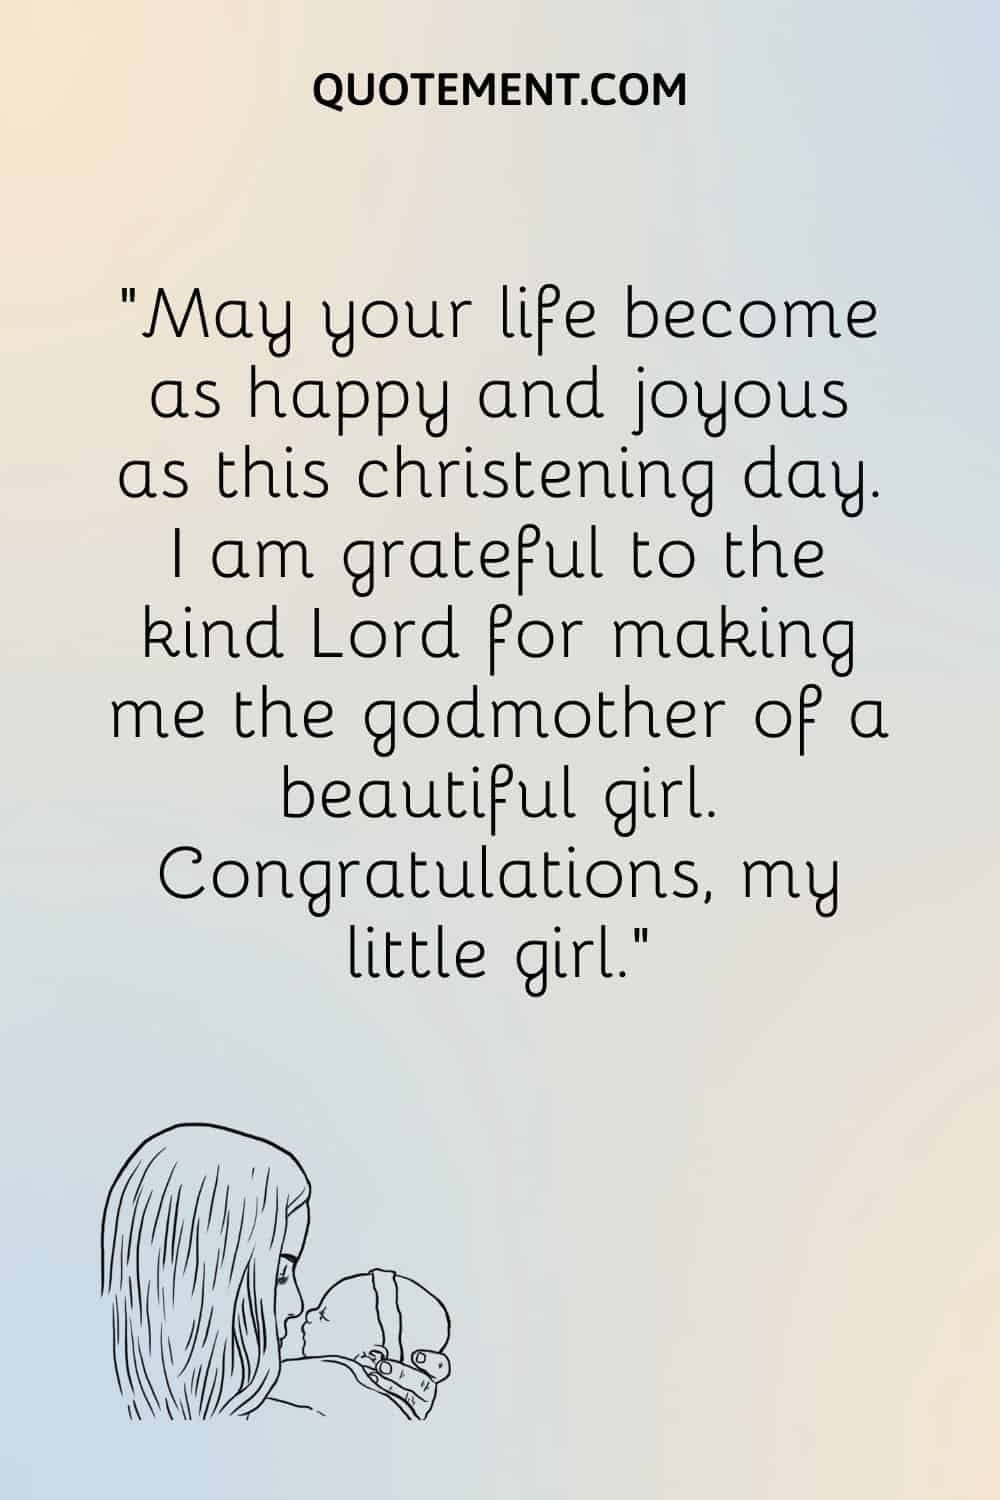 “May your life become as happy and joyous as this christening day. I am grateful to the kind Lord for making me the godmother of a beautiful girl. Congratulations, my little girl.”